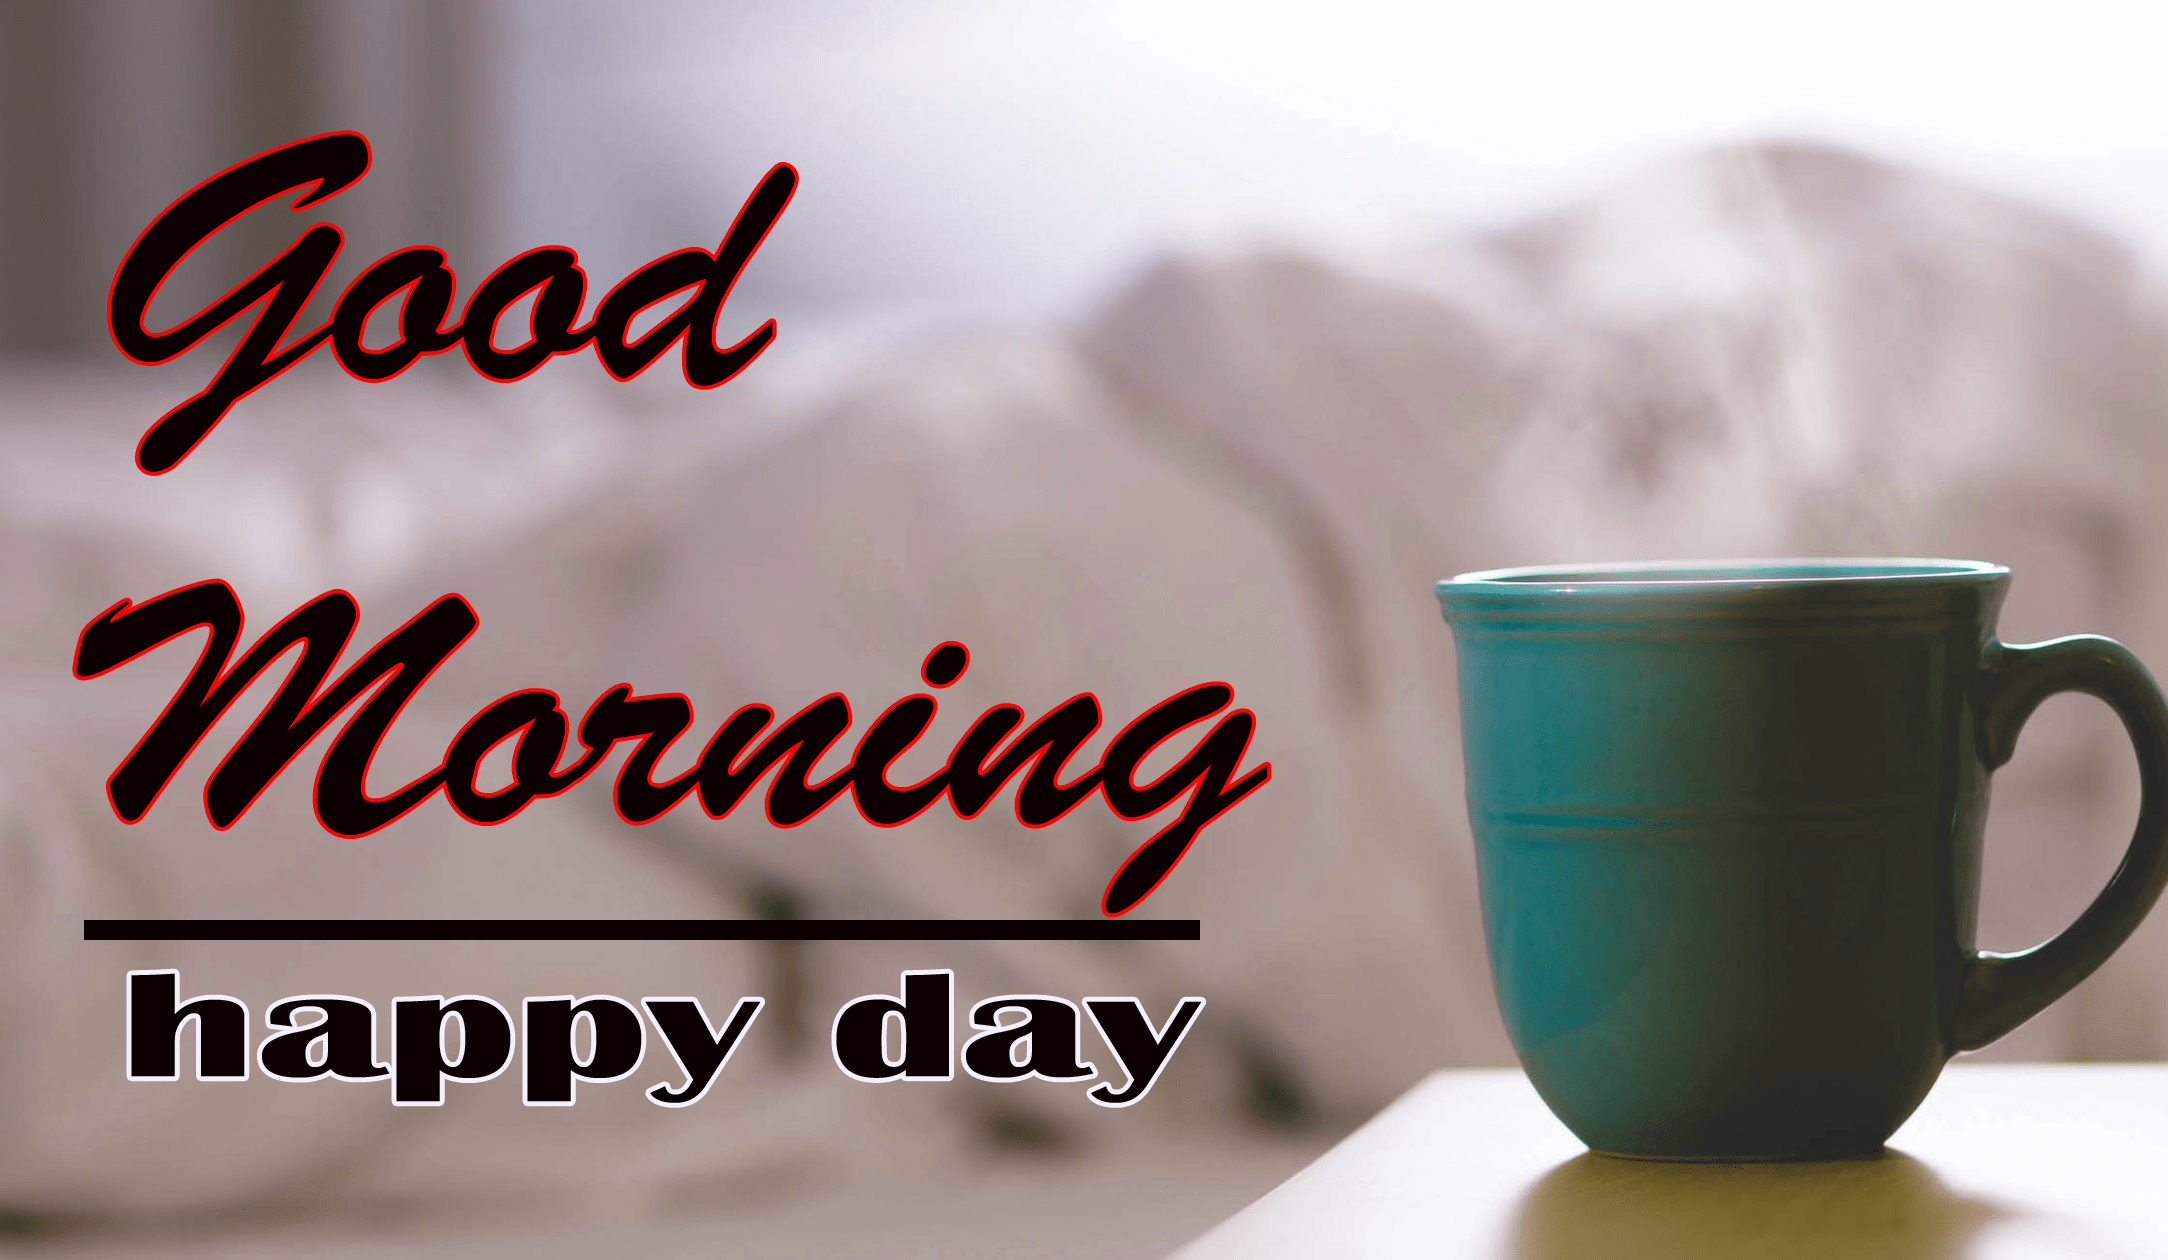 Tea Coffee 4k Ultra Free good morning Pics Images Download 